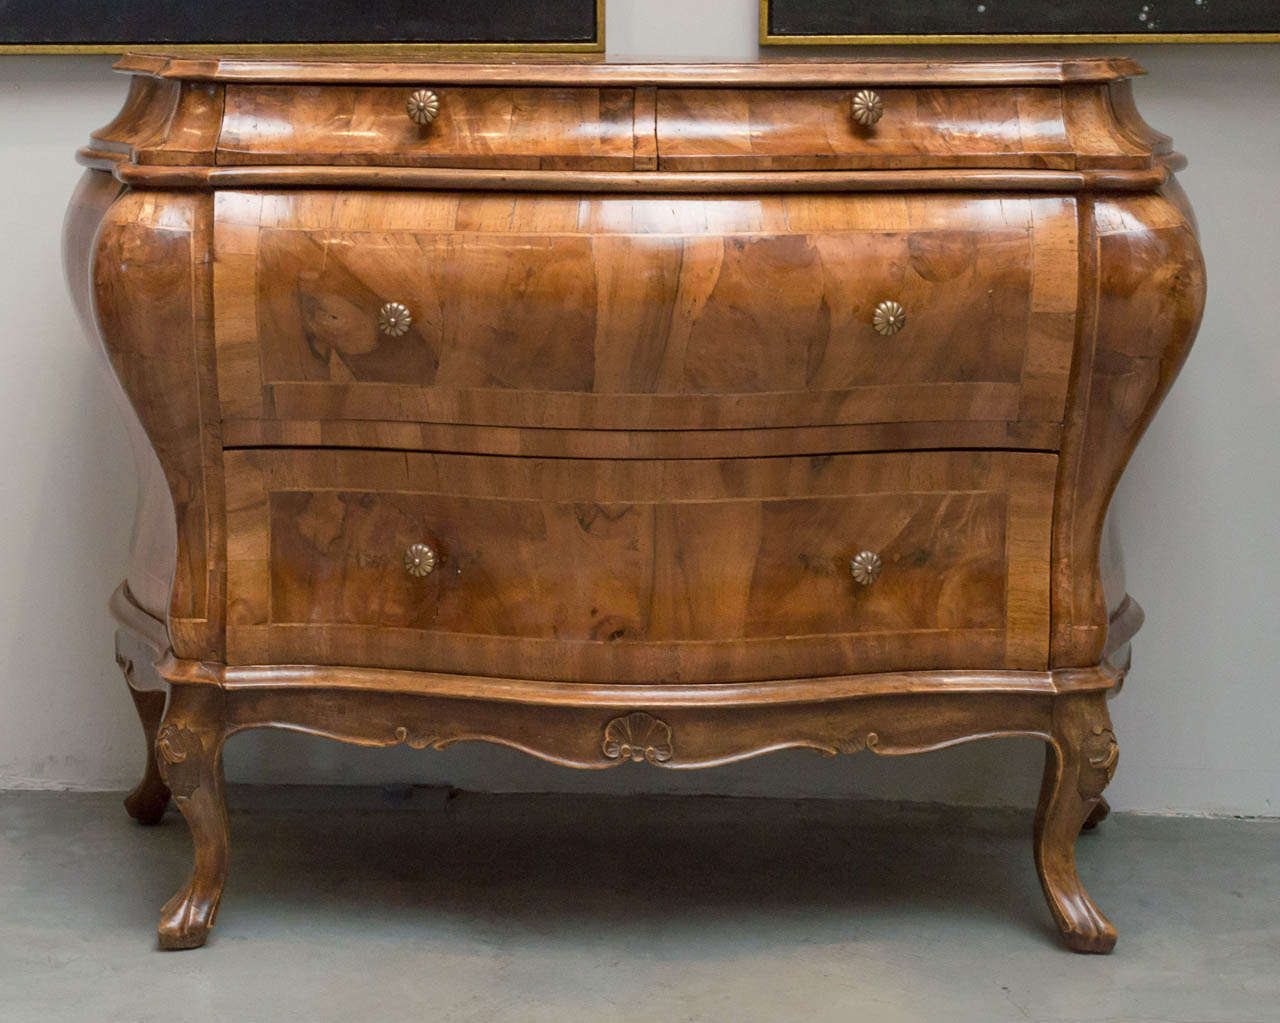 Late 19th century Italian Yew wood carved and set in random matched yew wood Bombay, burled. Rococo inspired Commode with shaped top and four drawers raised on cabriole legs with scrolling apron.